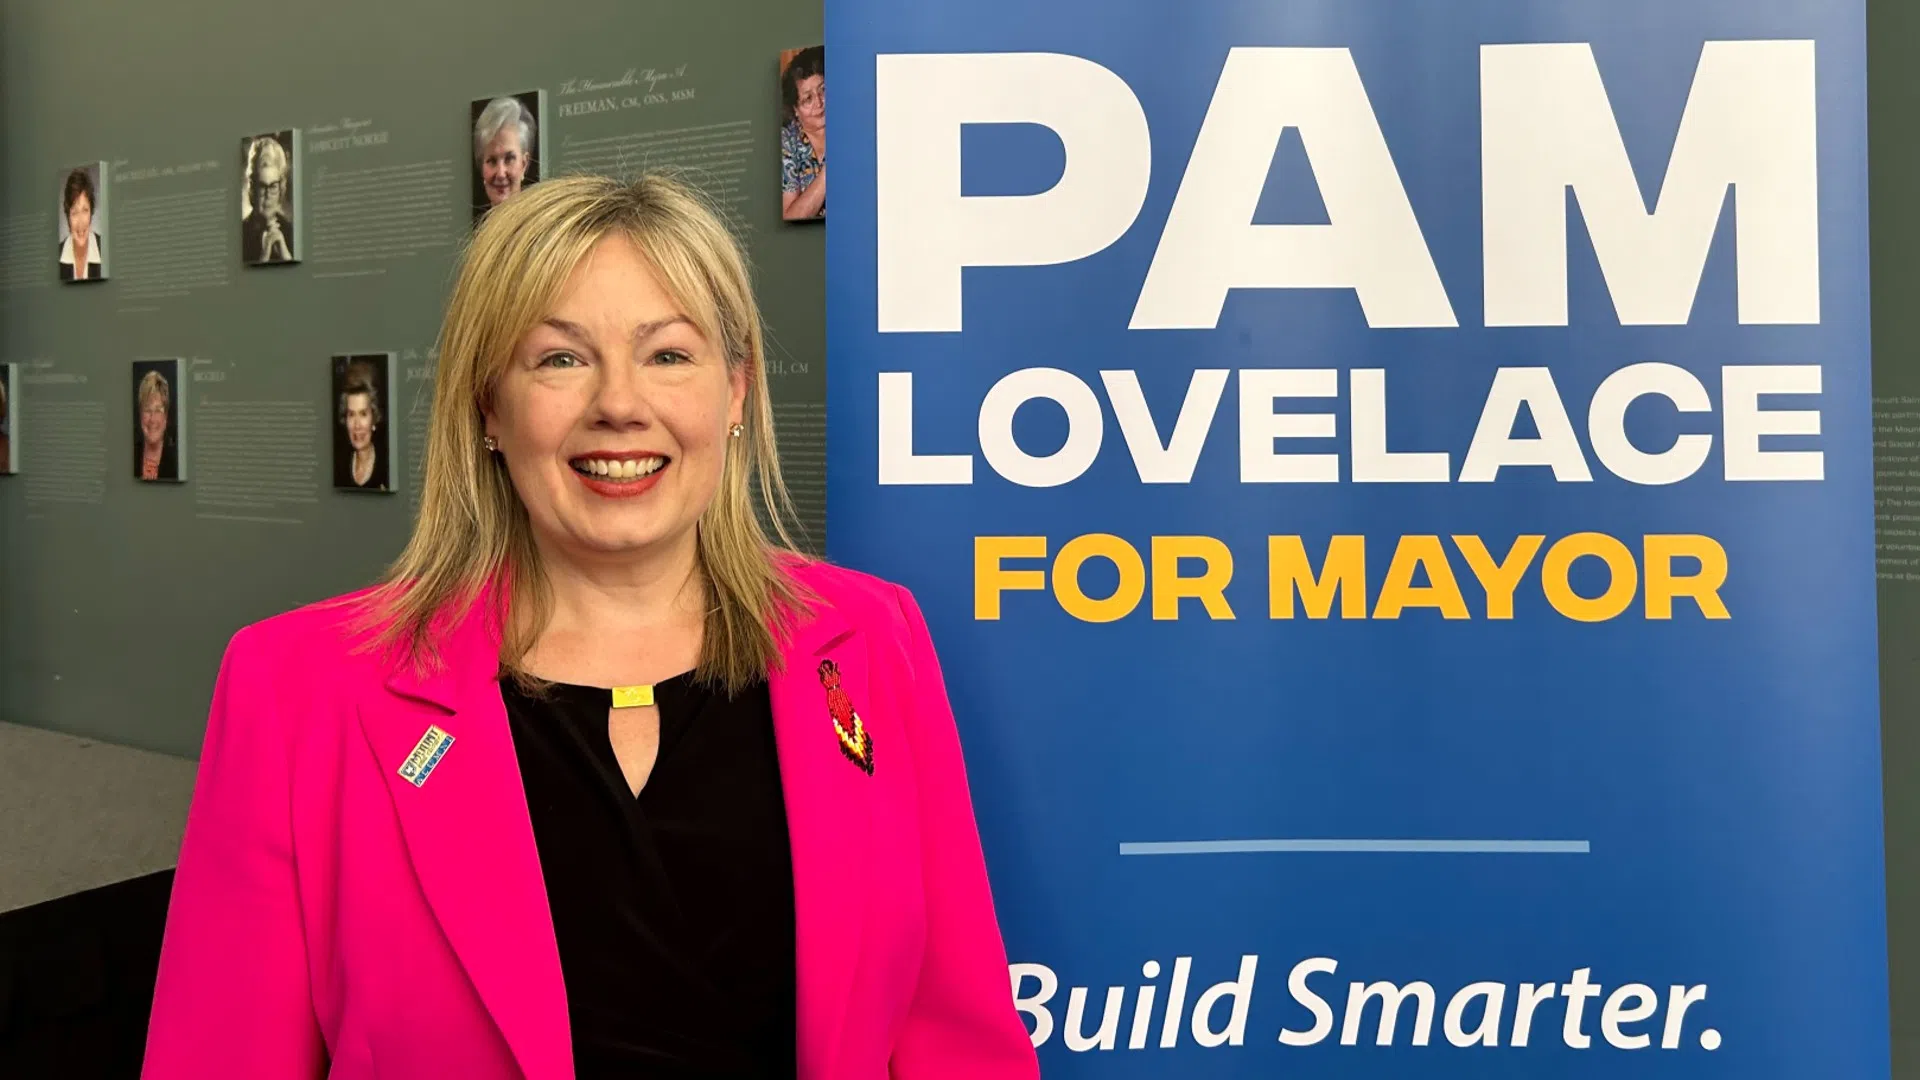 Halifax councillor Pam Lovelace running for mayor